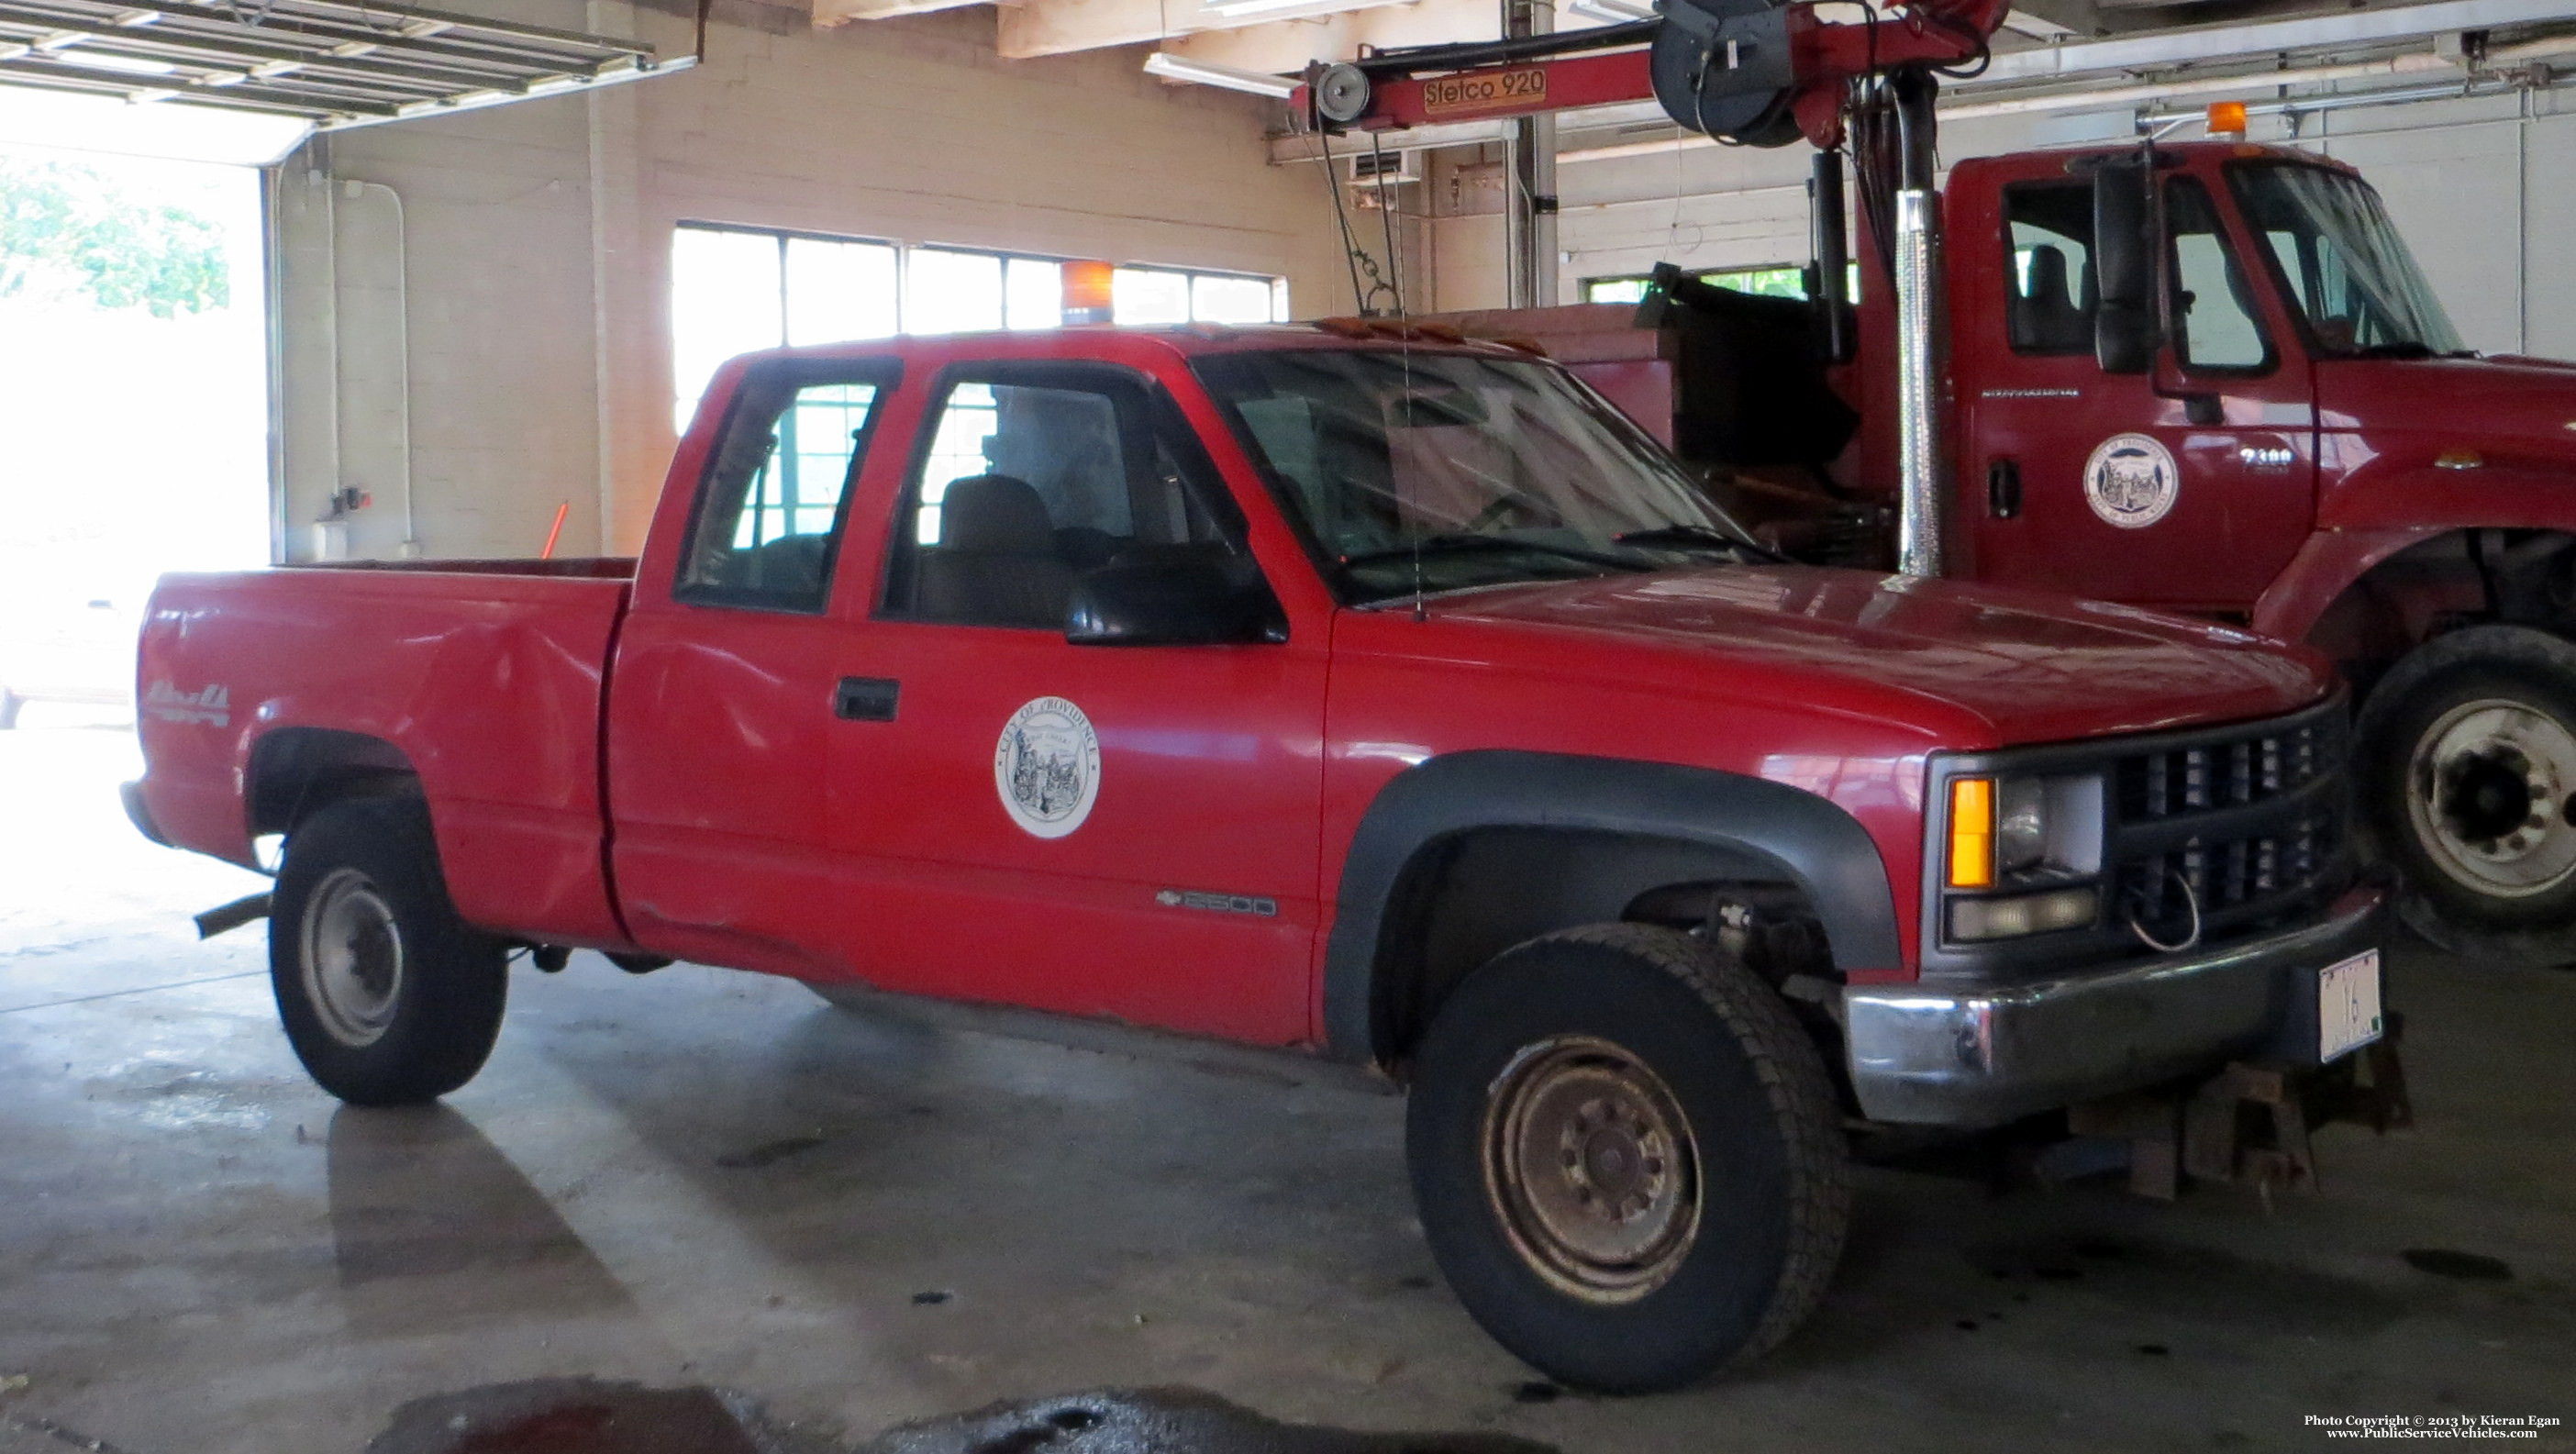 A photo  of Providence Sewer Division
            Truck 16, a 1988-1998 Chevrolet 2500 Extended Cab             taken by Kieran Egan